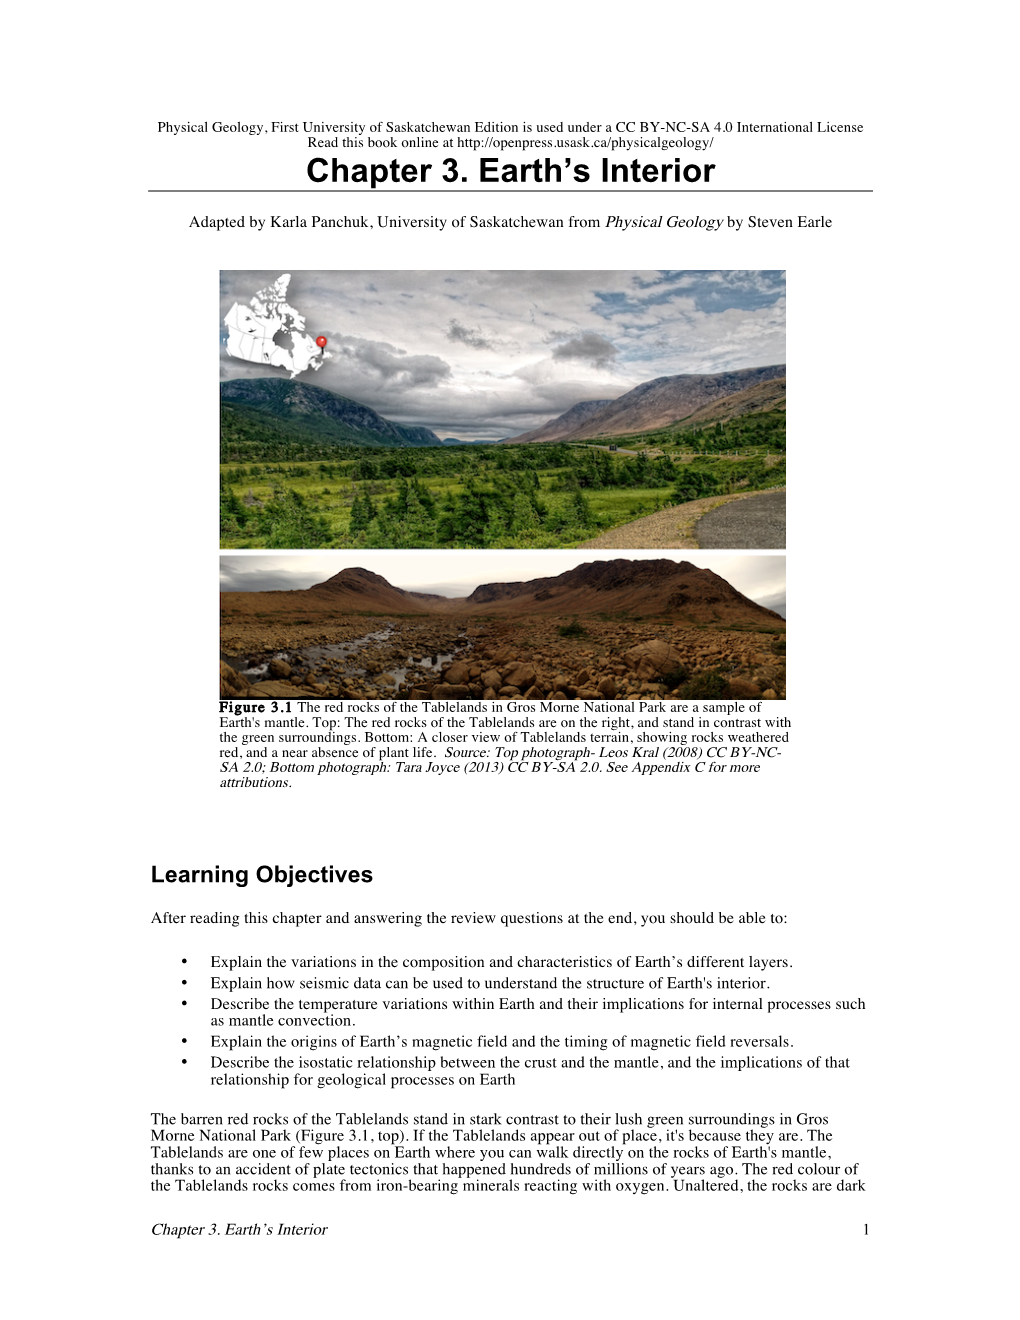 Chapter 3. Earth's Interior